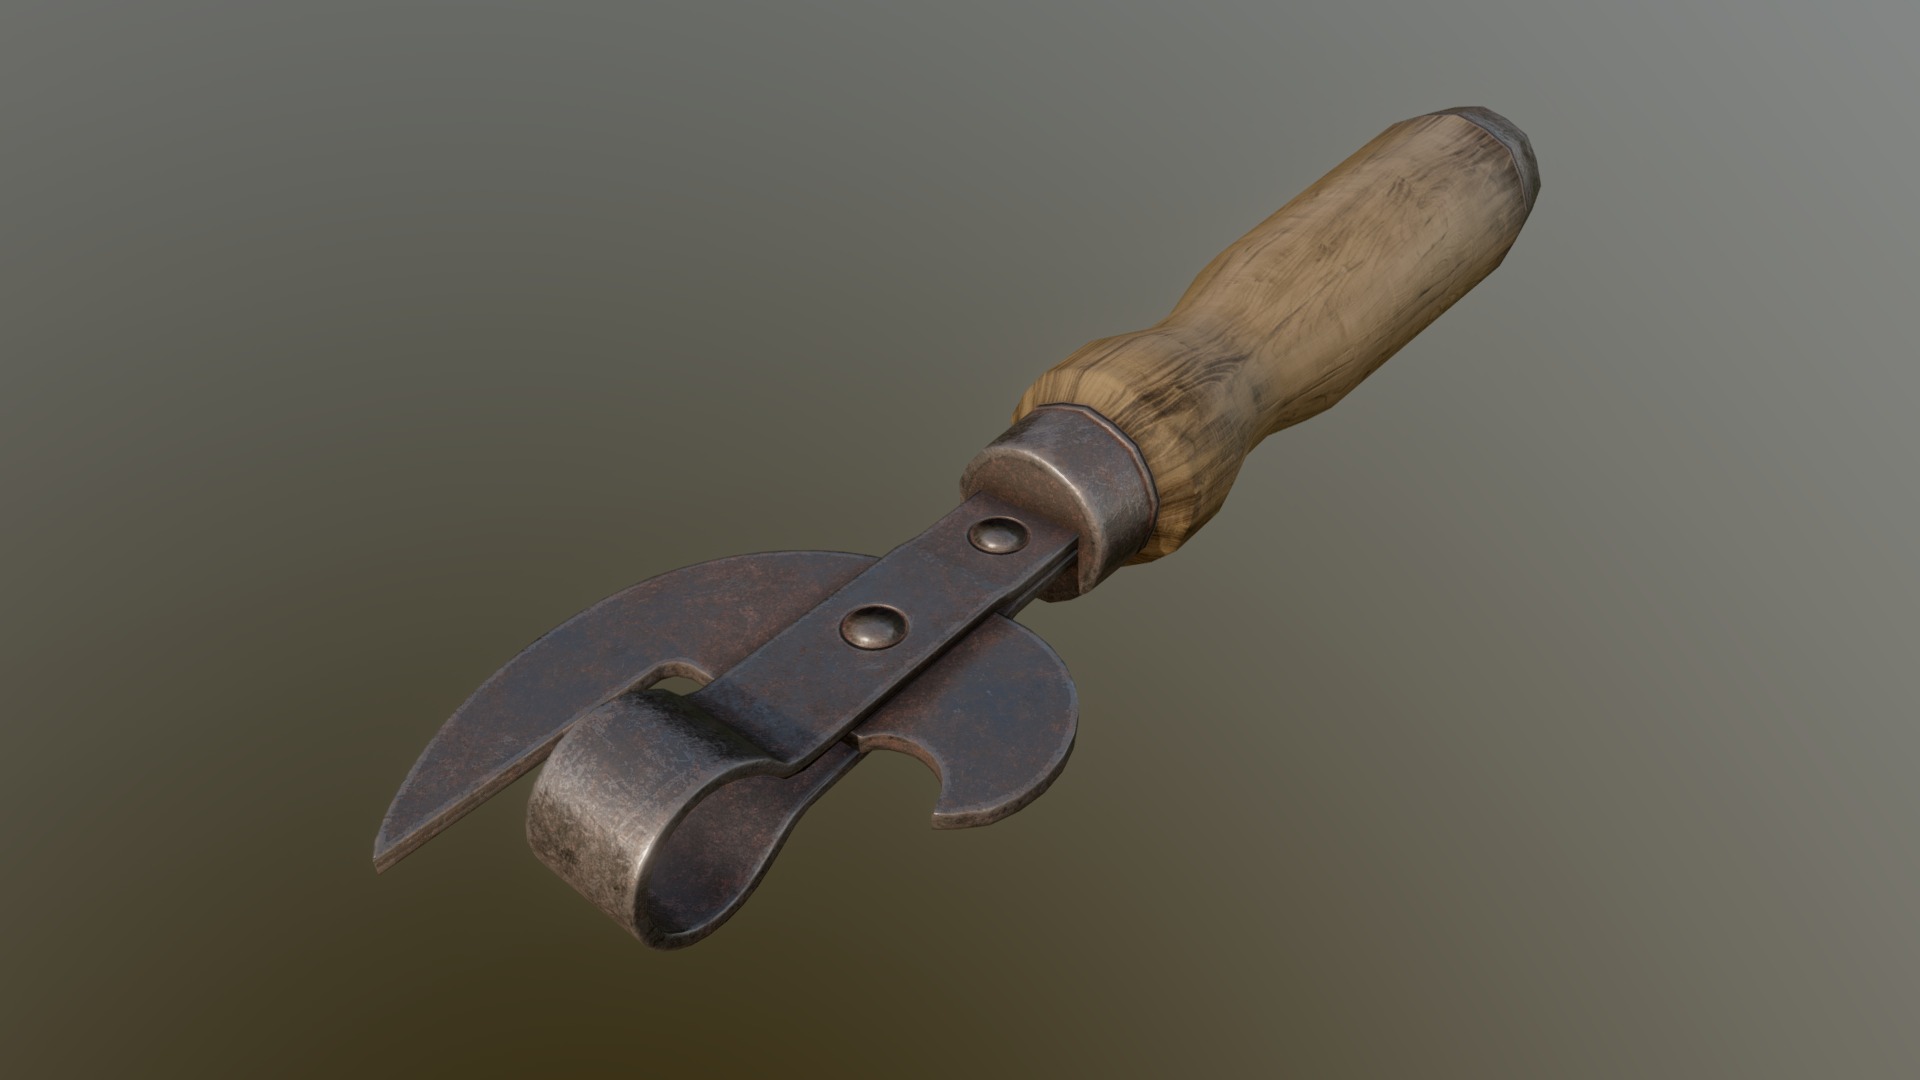 3D model Game Art: Can Opener - This is a 3D model of the Game Art: Can Opener. The 3D model is about a knife with a handle.